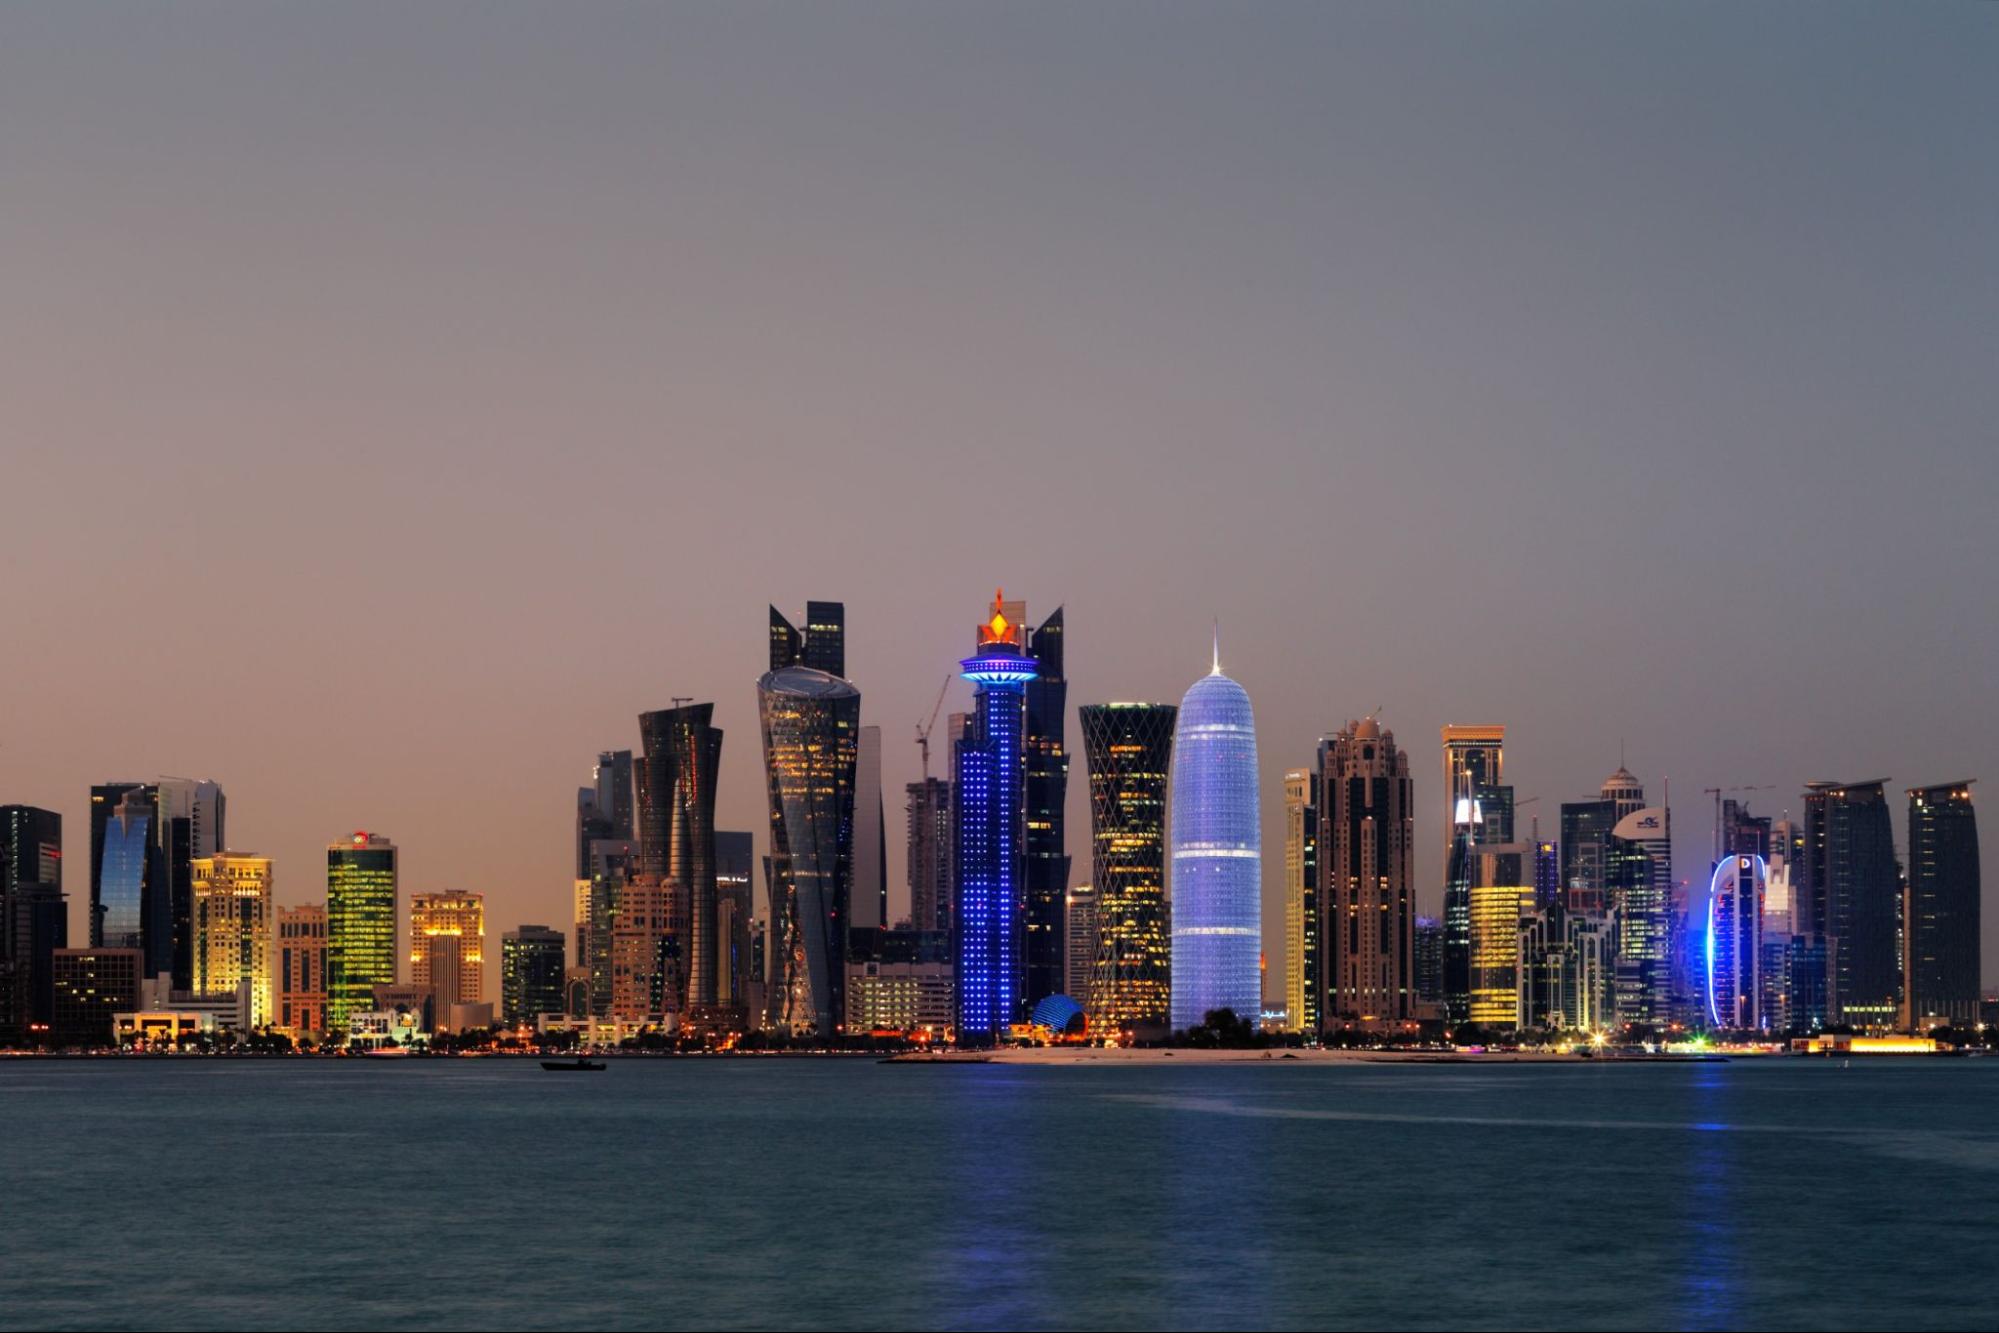 Doha, Qatar at Dusk is a beautiful city skyline of impressive contemporary architecture